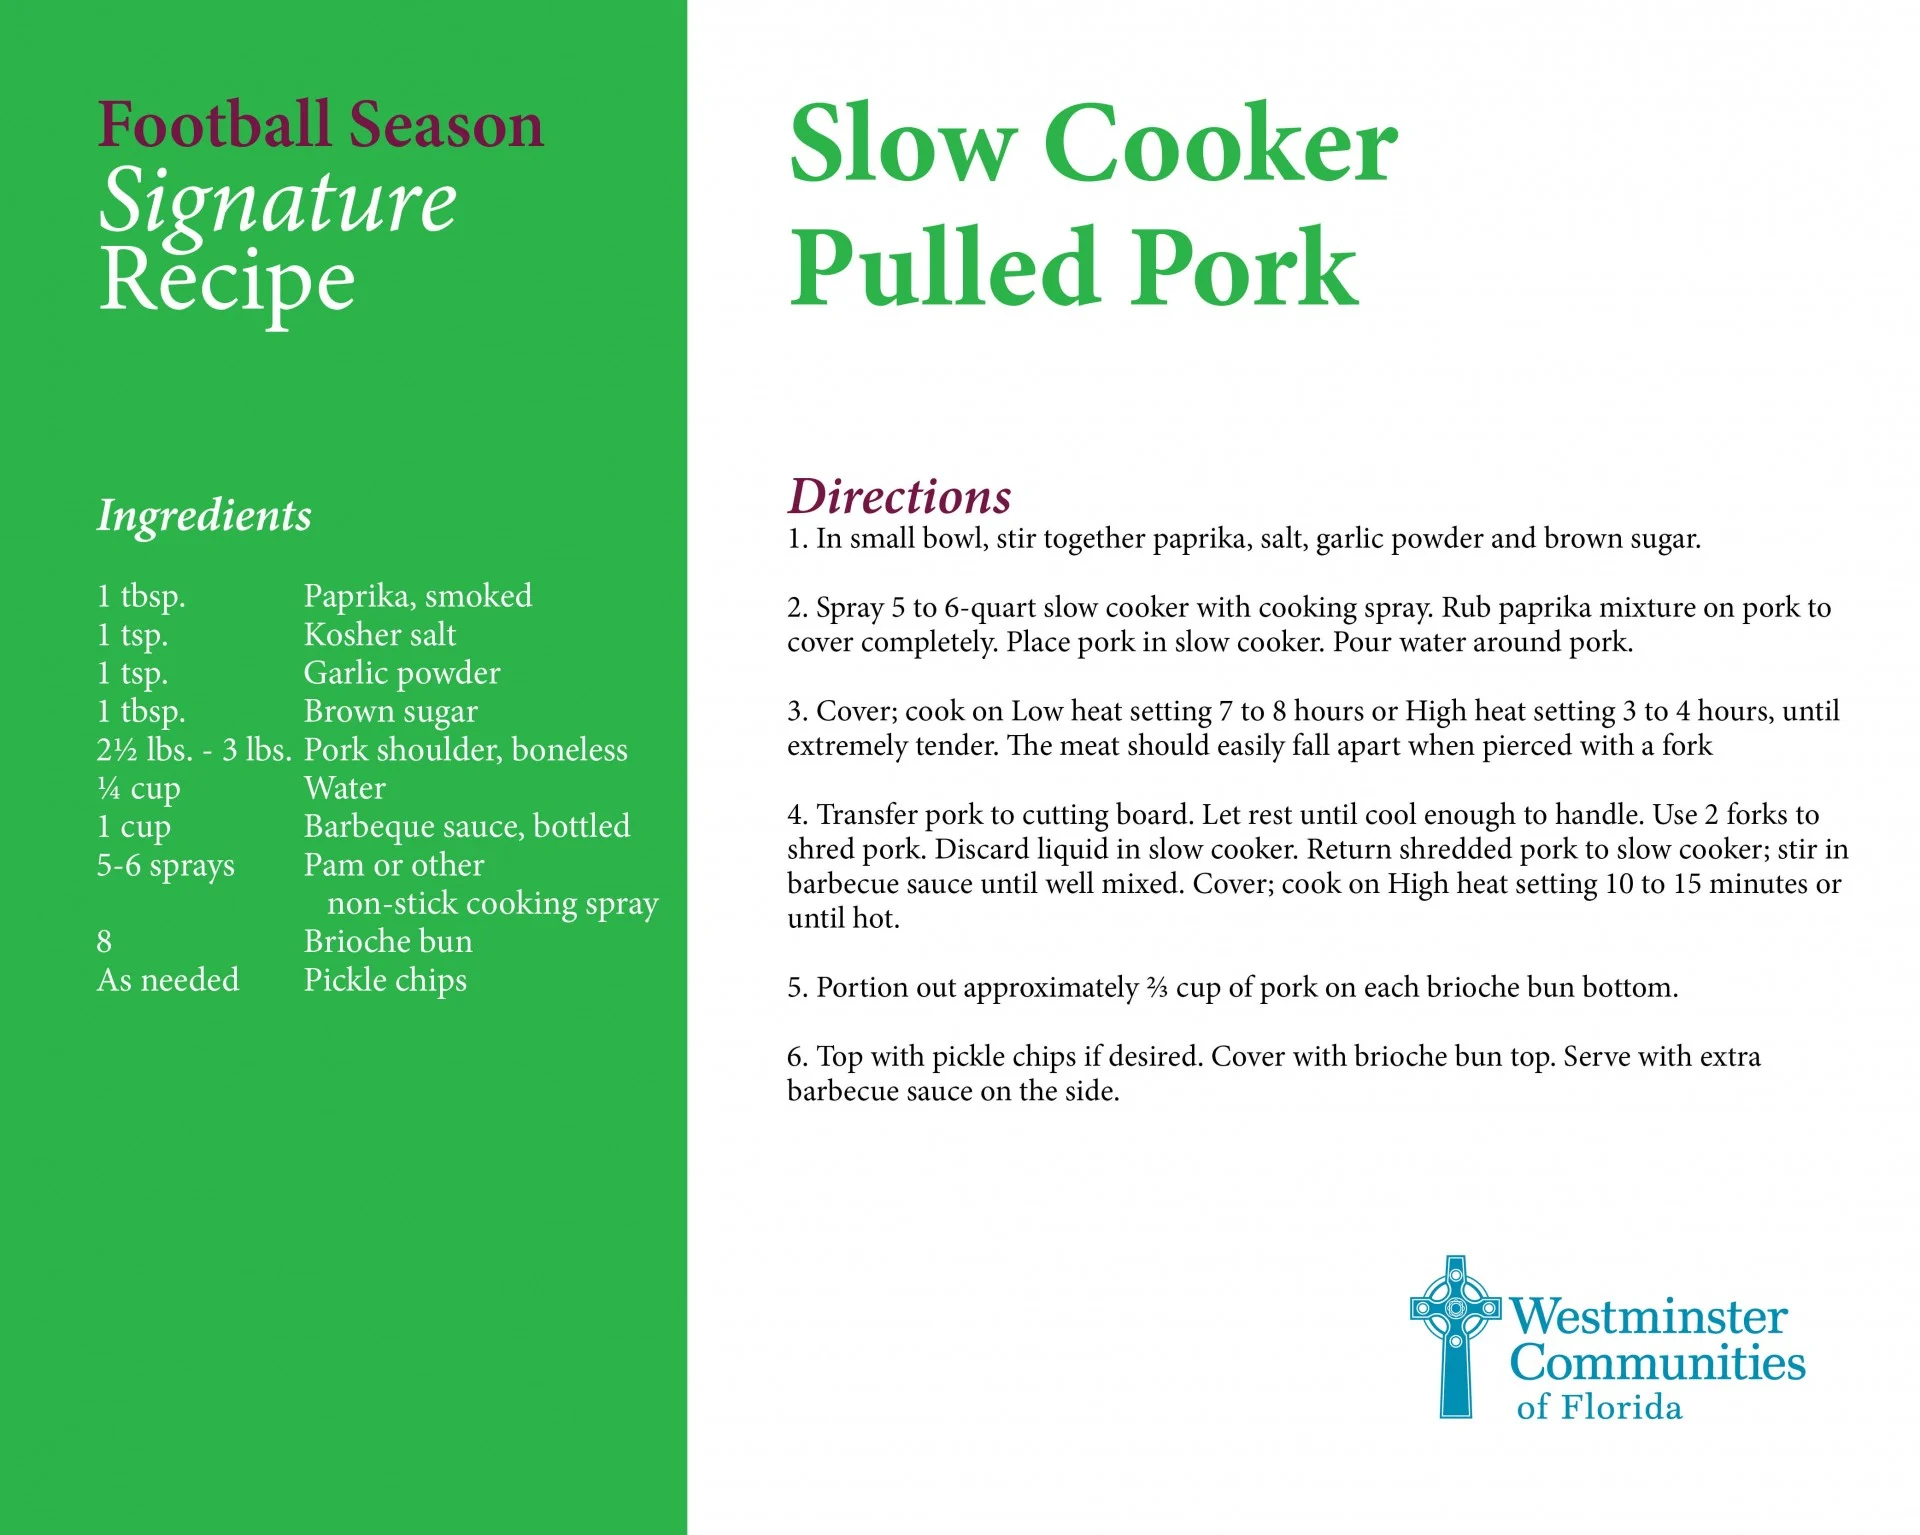 Our Signature Slow Cooker Pulled Pork